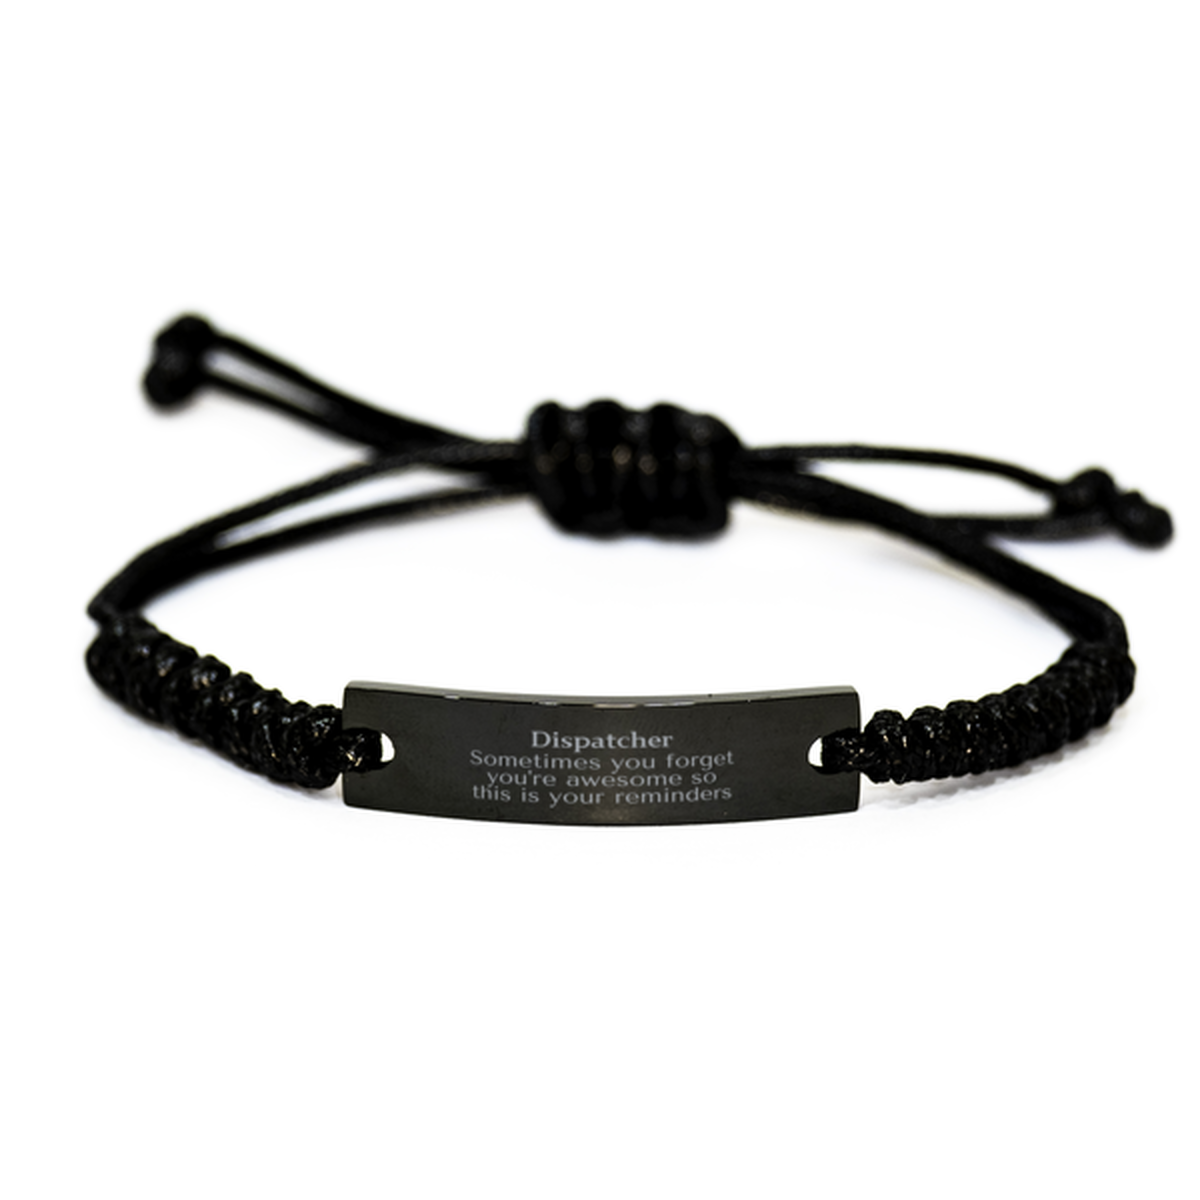 Sentimental Dispatcher Black Rope Bracelet, Dispatcher Sometimes you forget you're awesome so this is your reminders, Graduation Christmas Birthday Gifts for Dispatcher, Men, Women, Coworkers